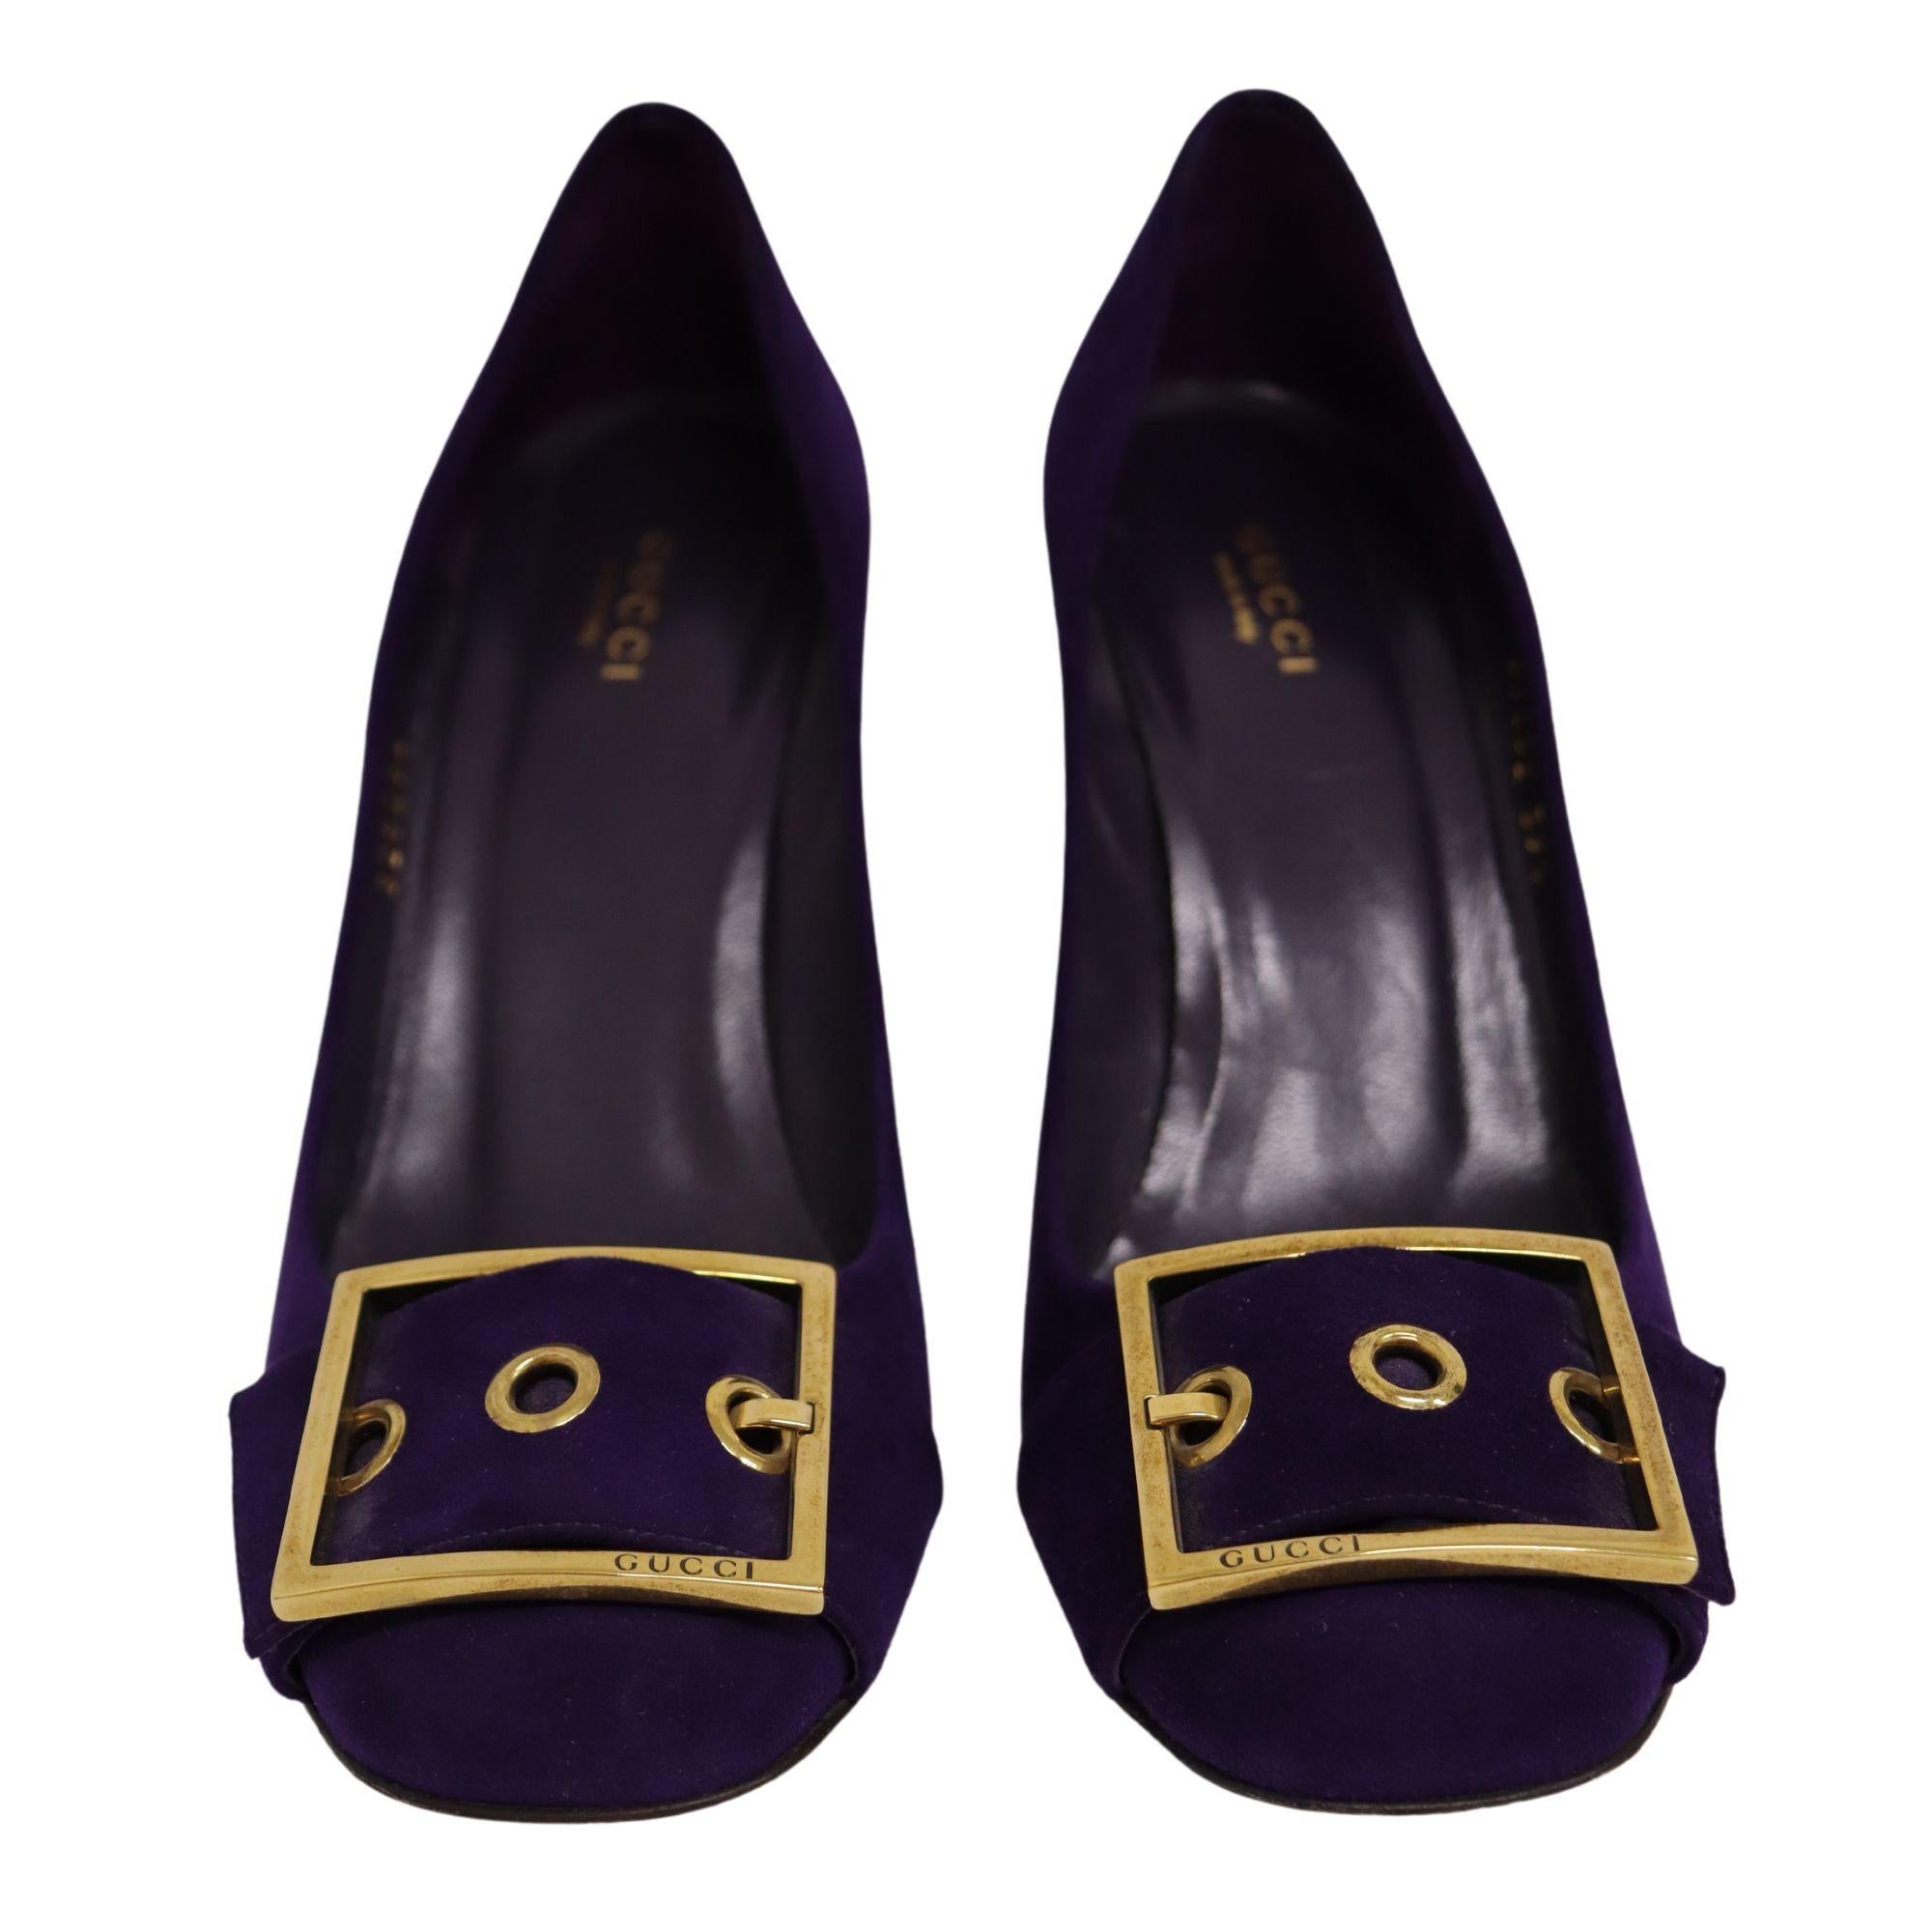 Gucci purple suede pumps with gold buckle detail on the front. In excellent condition.

Material: Suede leather

EU 39.5

Heel: 9cm



Condition

Overall Condition: Good
Interior Condition: Good
Exterior Condition: Good

Extras

N/A